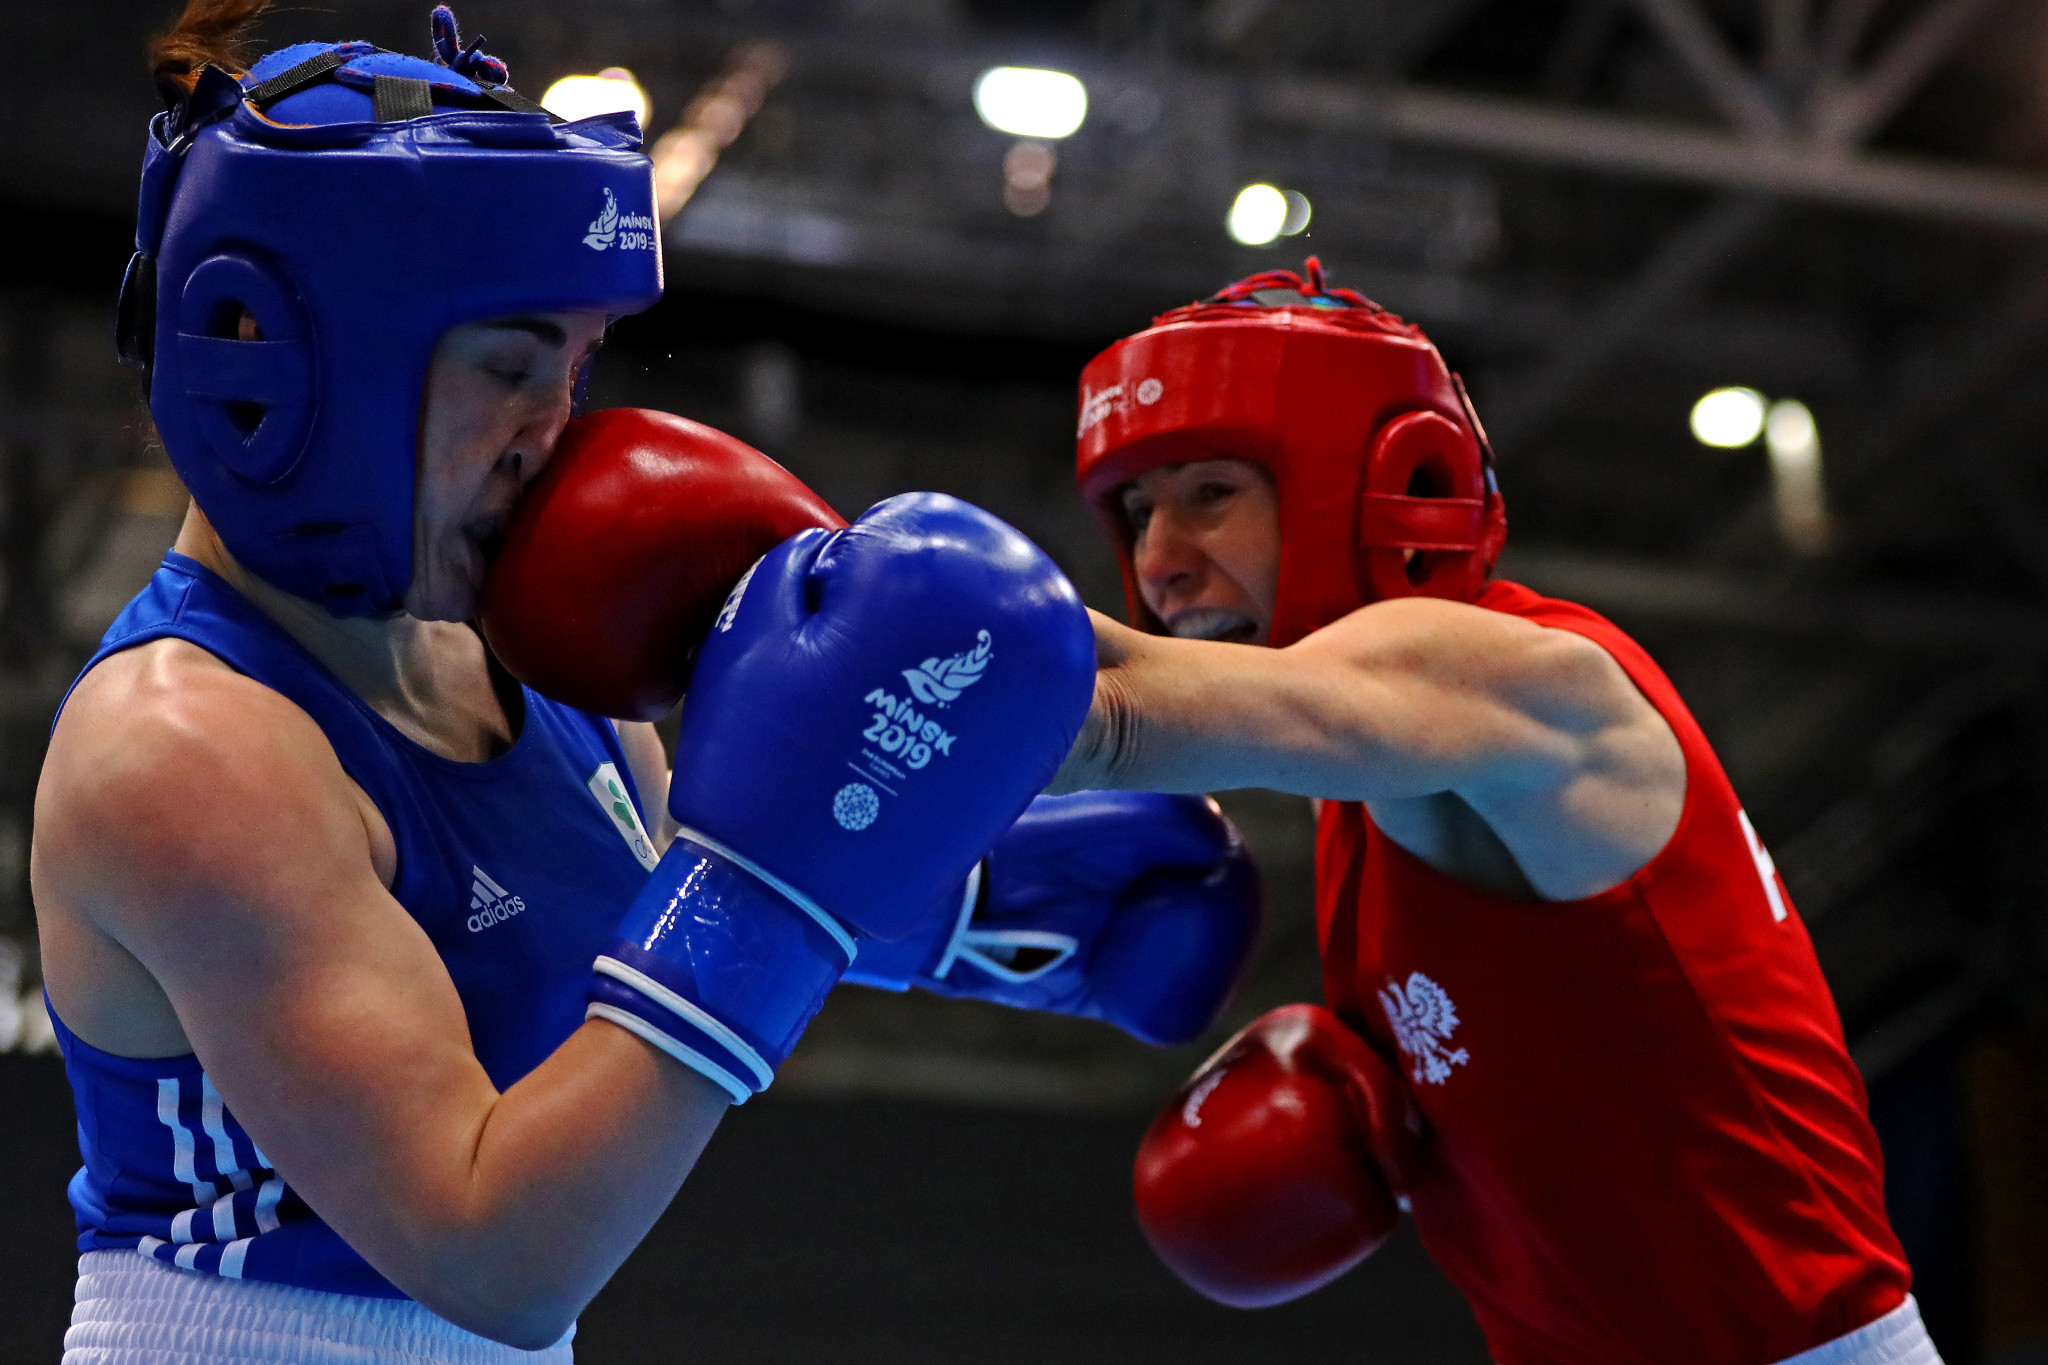 Karolina Koszewska of Poland, in red, is one win away from Tokyo 2020 after winning her semi-final in the women's welterweight category box-offs ©Getty Images